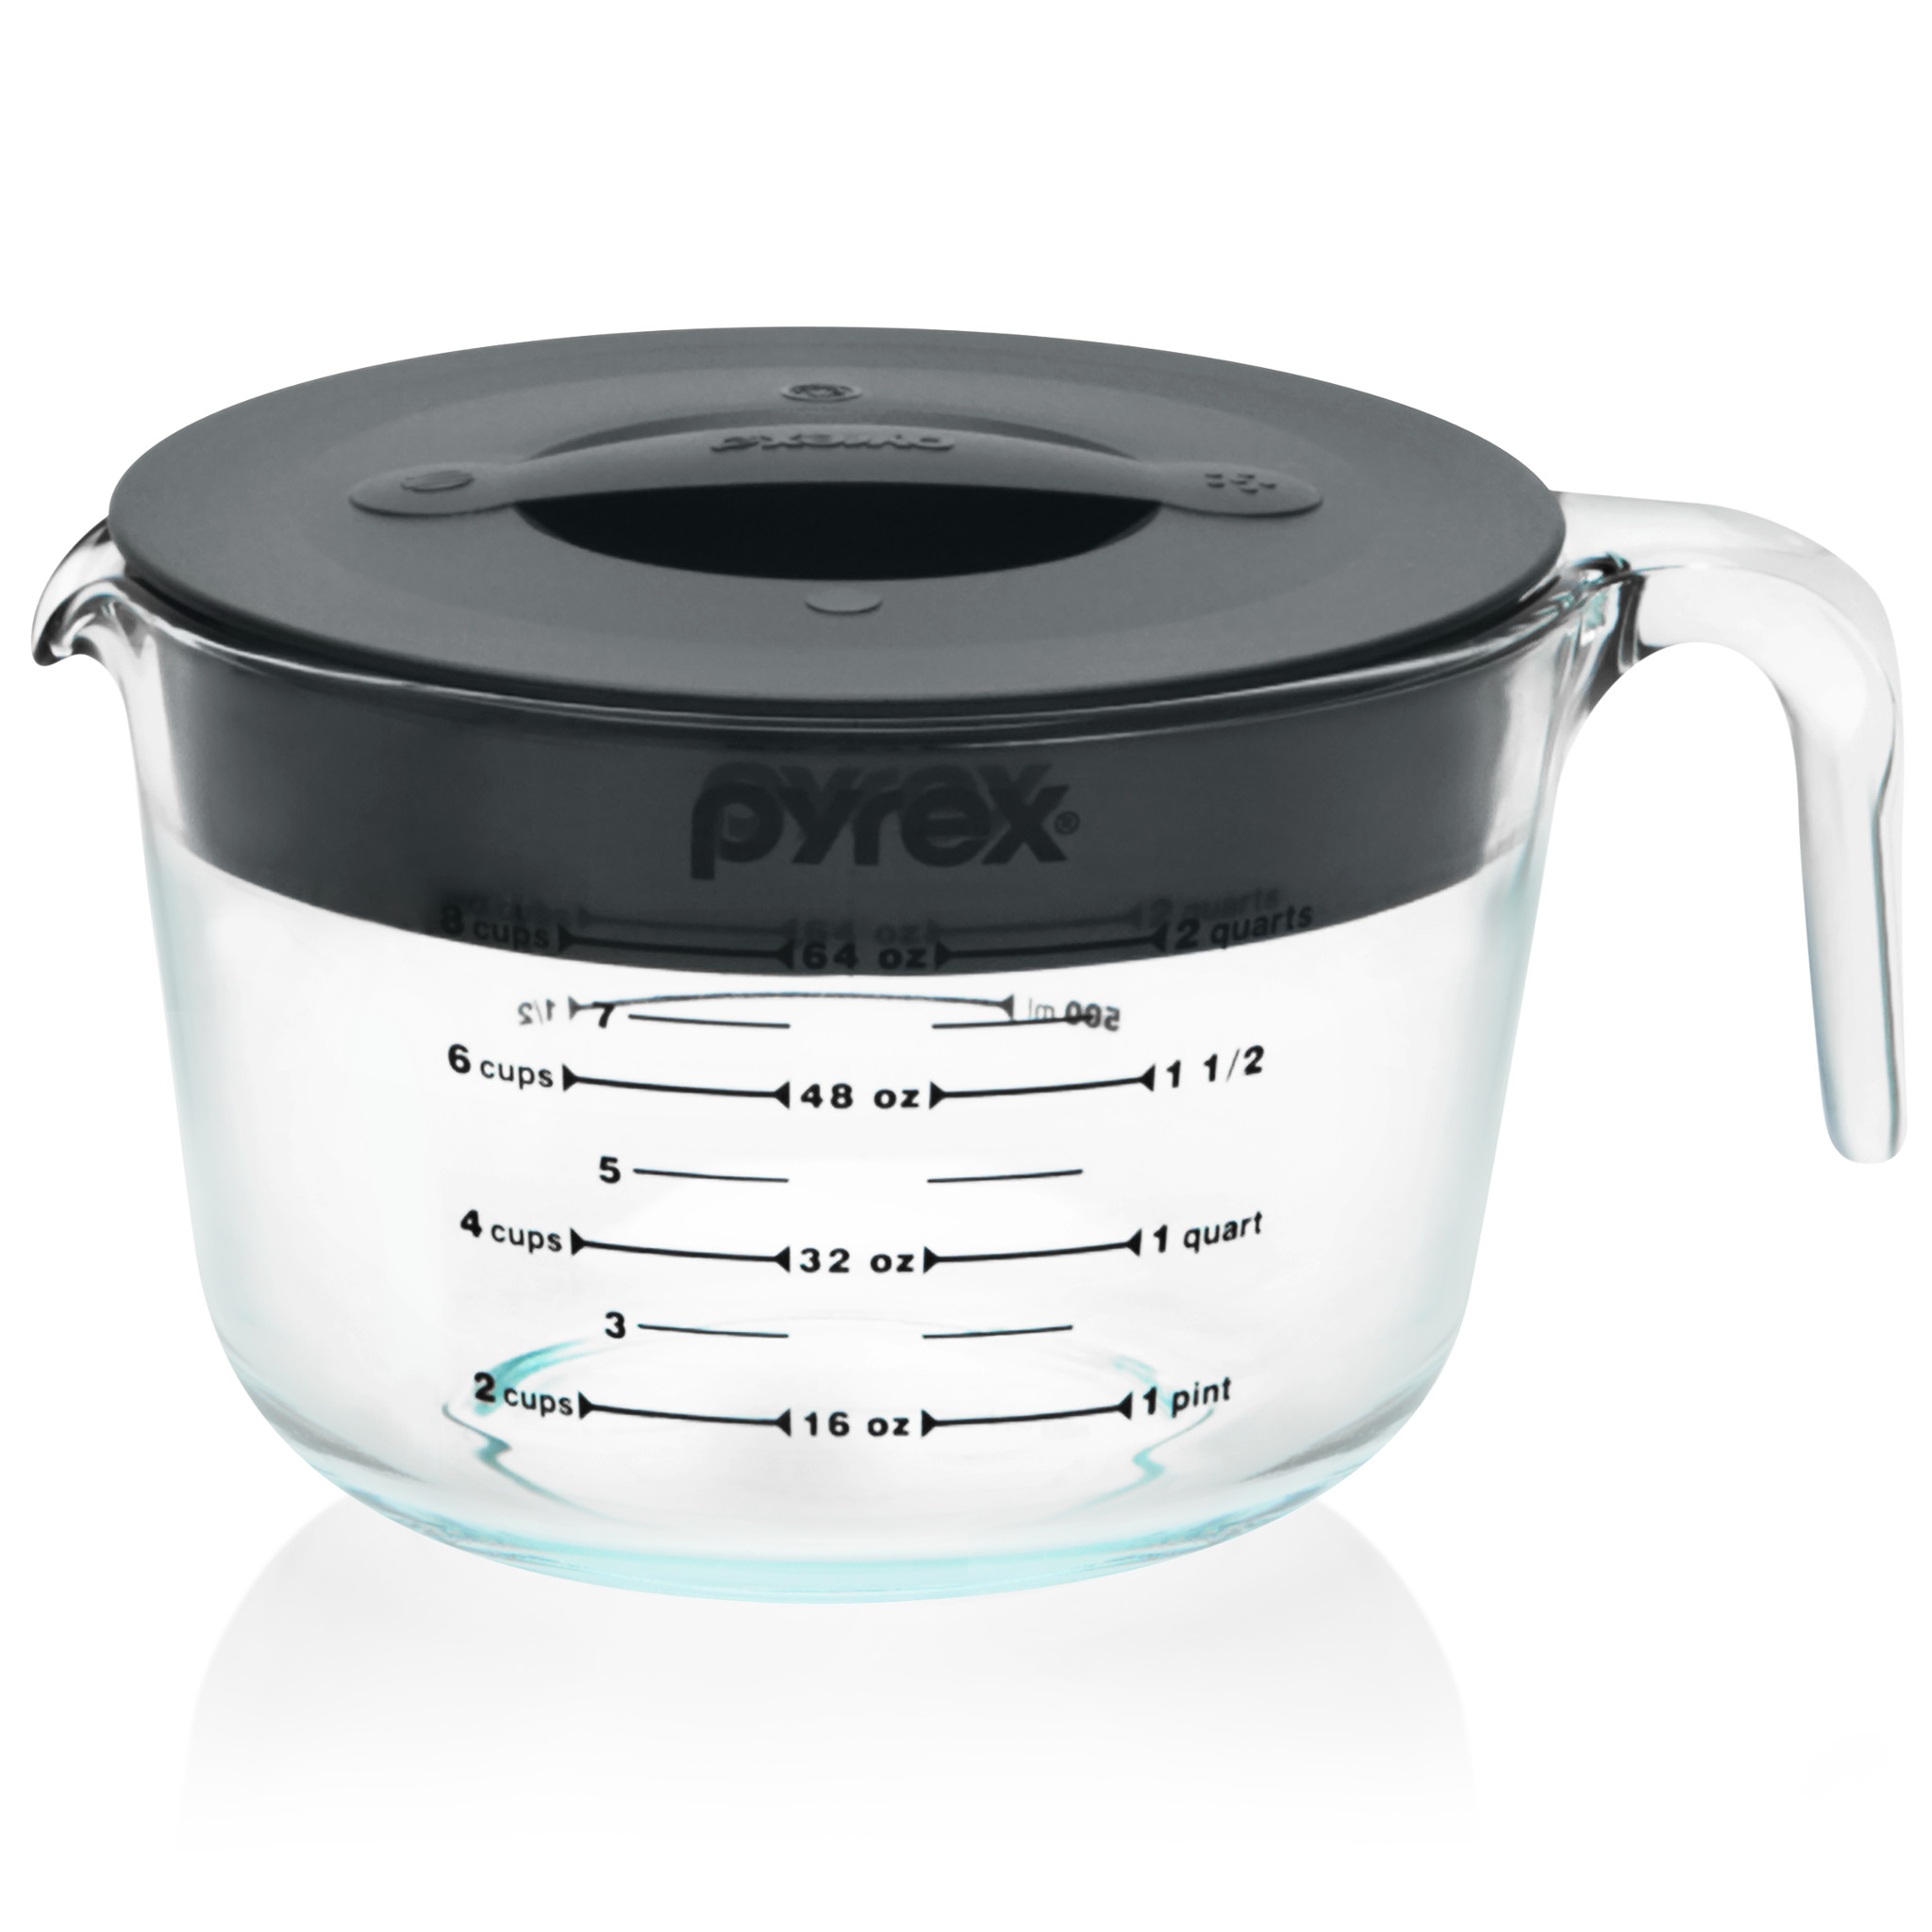 https://embed.widencdn.net/img/worldkitchen/ox5bcebeqy/2048px/1135456_PY_Prepware_Silo_Square_Measuring-Cup_8-Cup-with-Grey-Lid_1.png